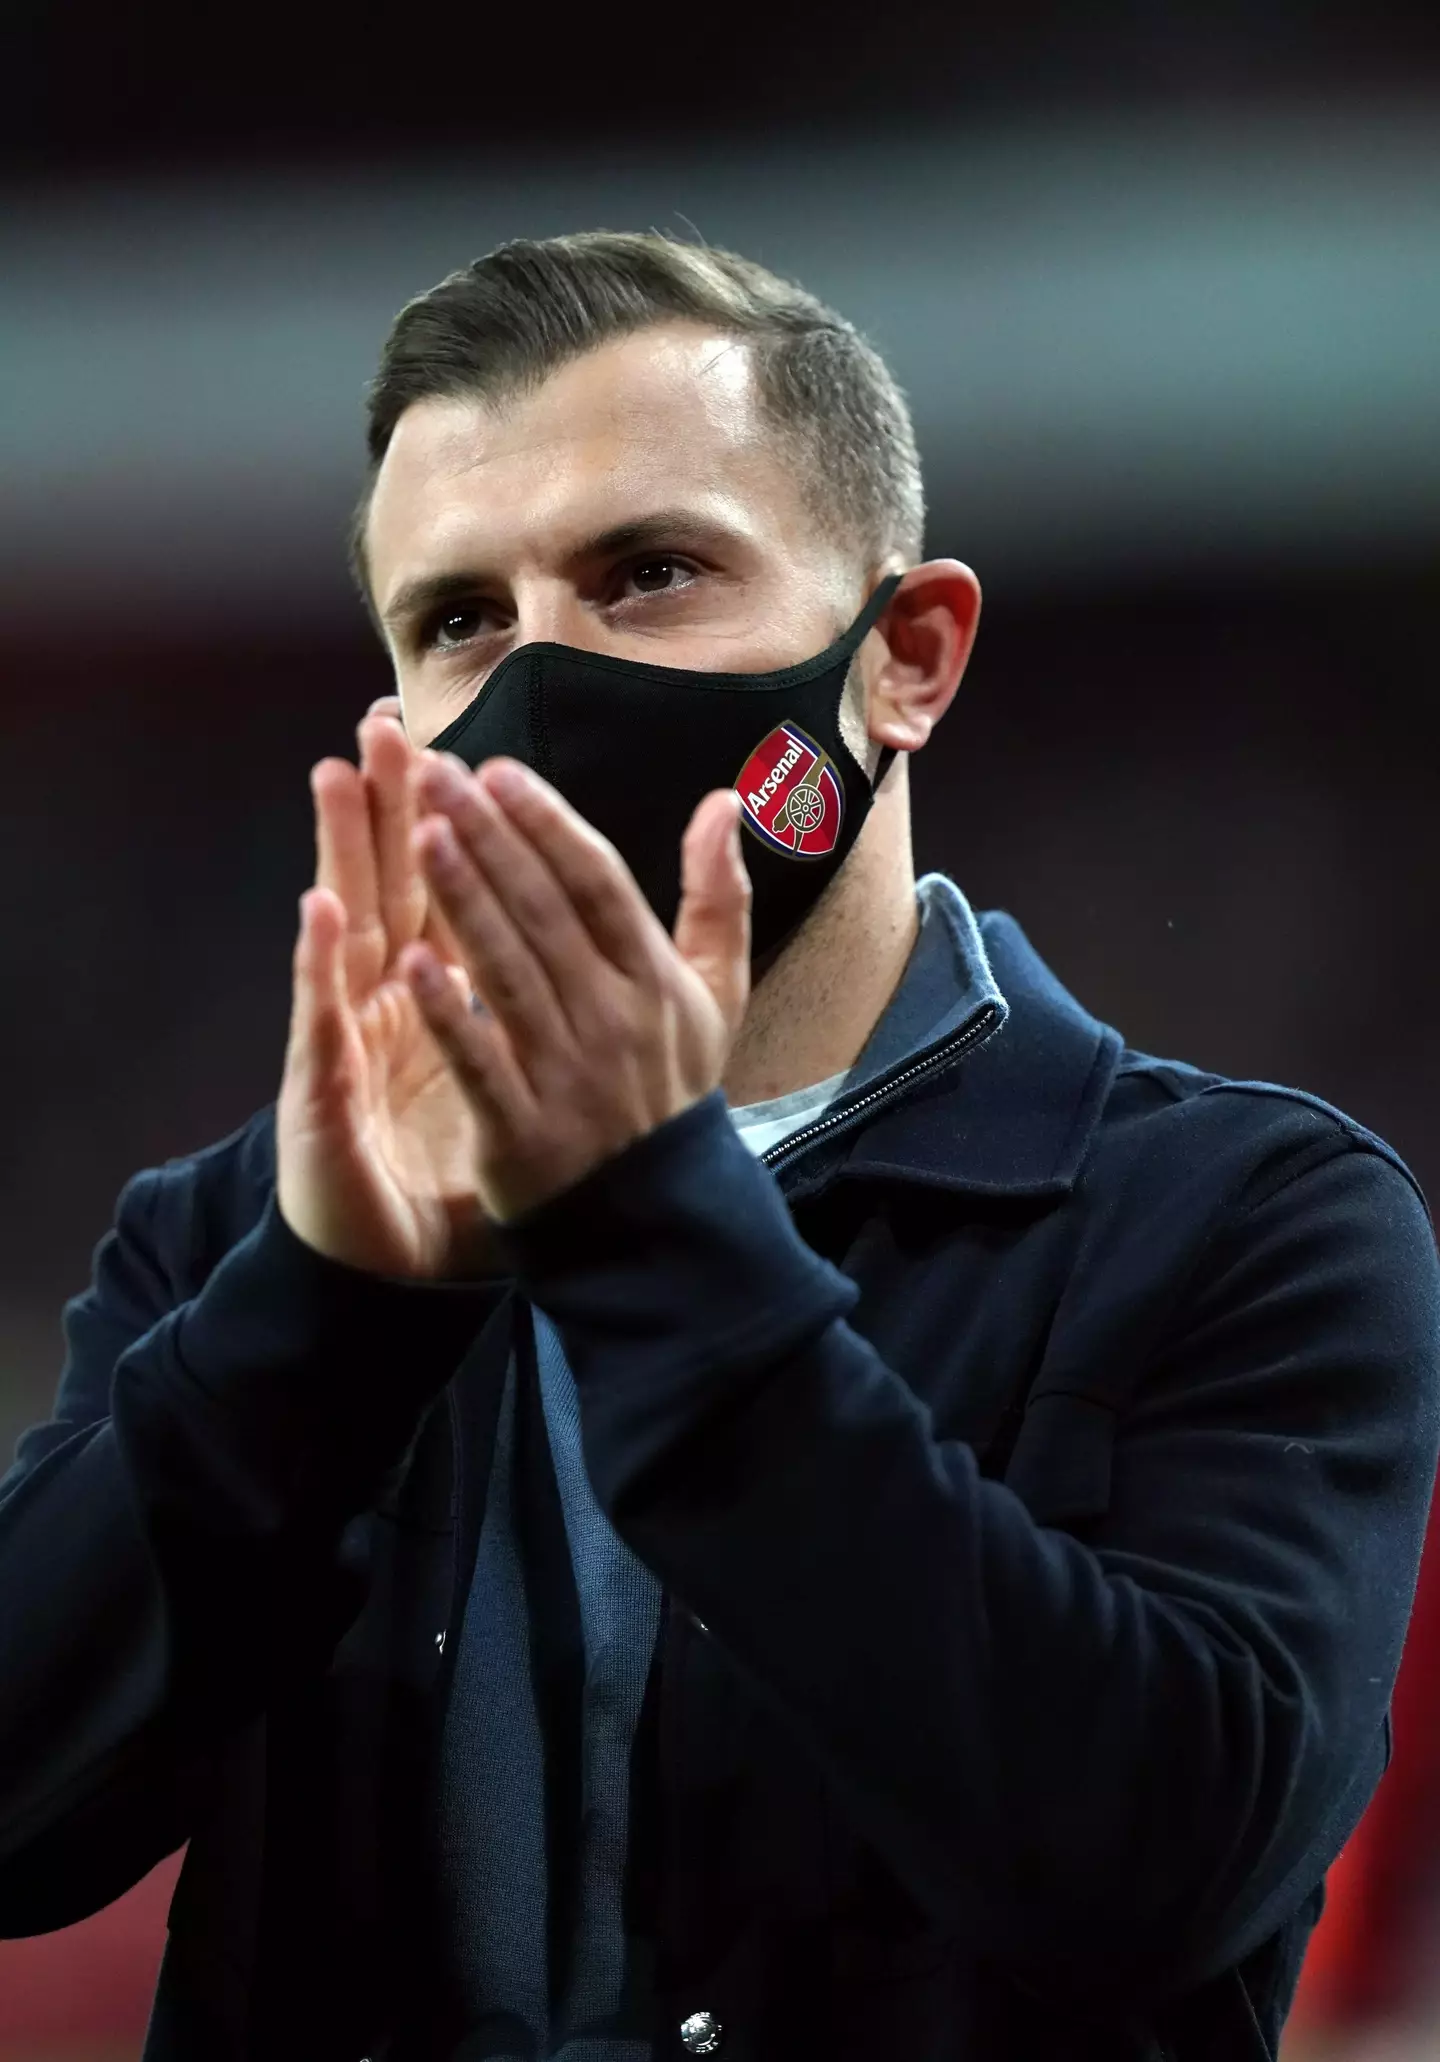 Former Arsenal player Jack Wilshere ahead of the Premier League match at Emirates Stadium, London. Picture date: Wednesday December 15, 2021. PA Images / Alamy Stock Photo